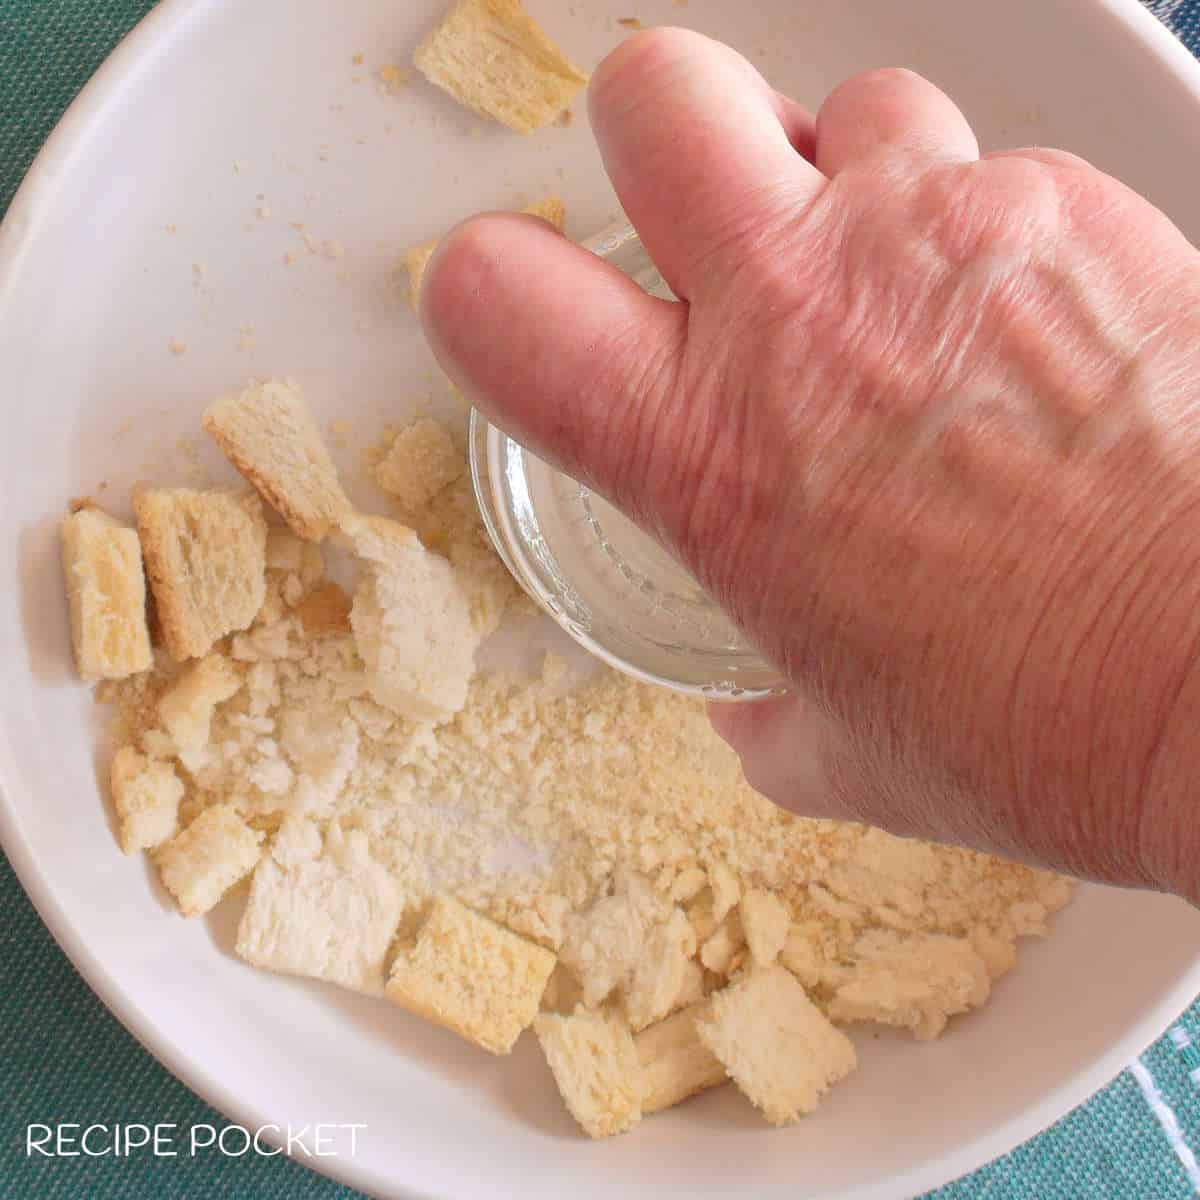 Bread crumbs being crushed by hand.